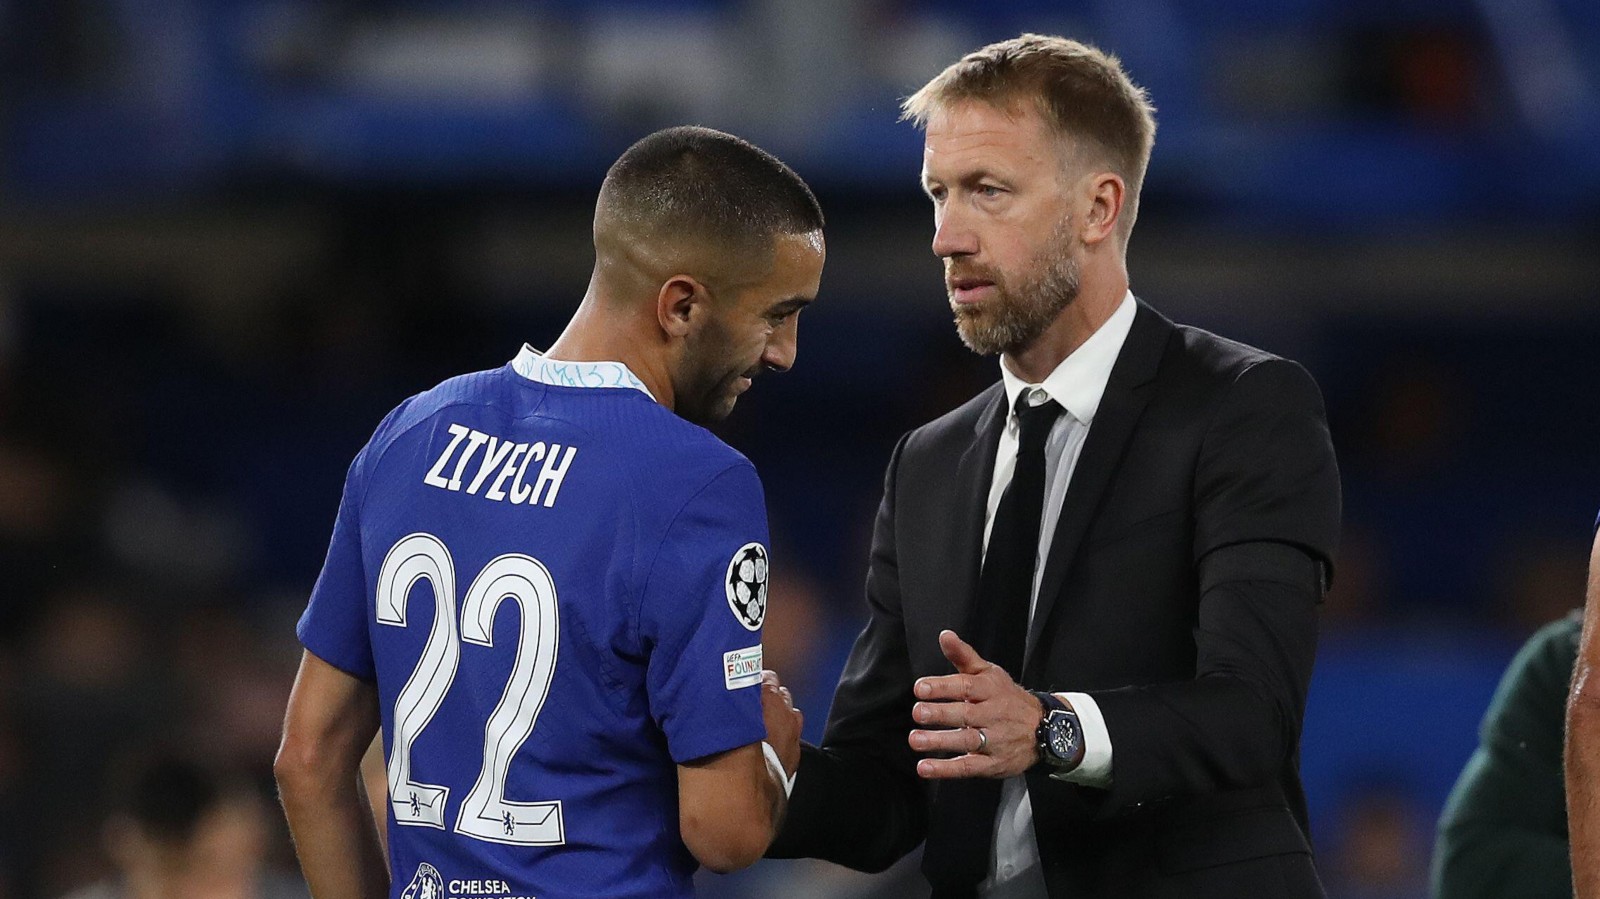 Chelsea forward Hakim Ziyech is embraced by manager Graham Potter